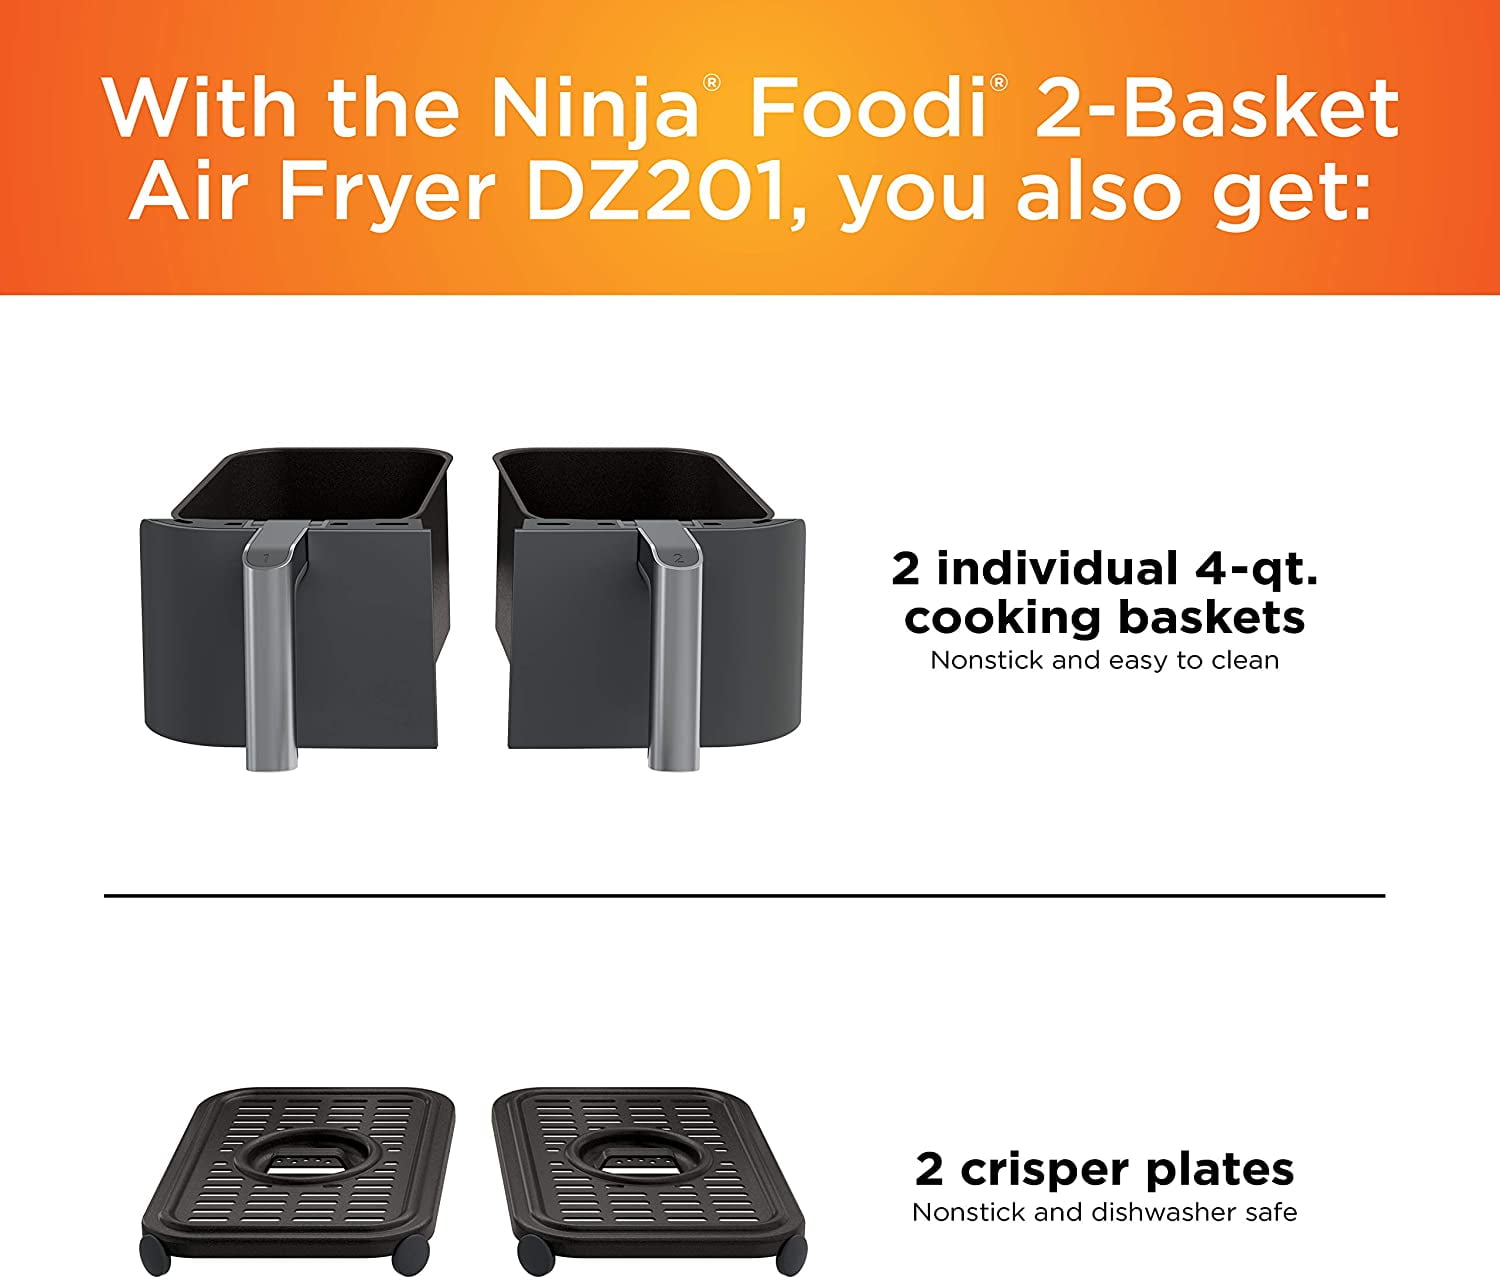  Ninja DZ201 Foodi 8 Quart 6-in-1 DualZone 2-Basket Air Fryer  with 2 Independent Frying Baskets, Match Cook & Smart Finish to Roast,  Broil, Dehydrate & More for Quick, Easy Meals, Grey 